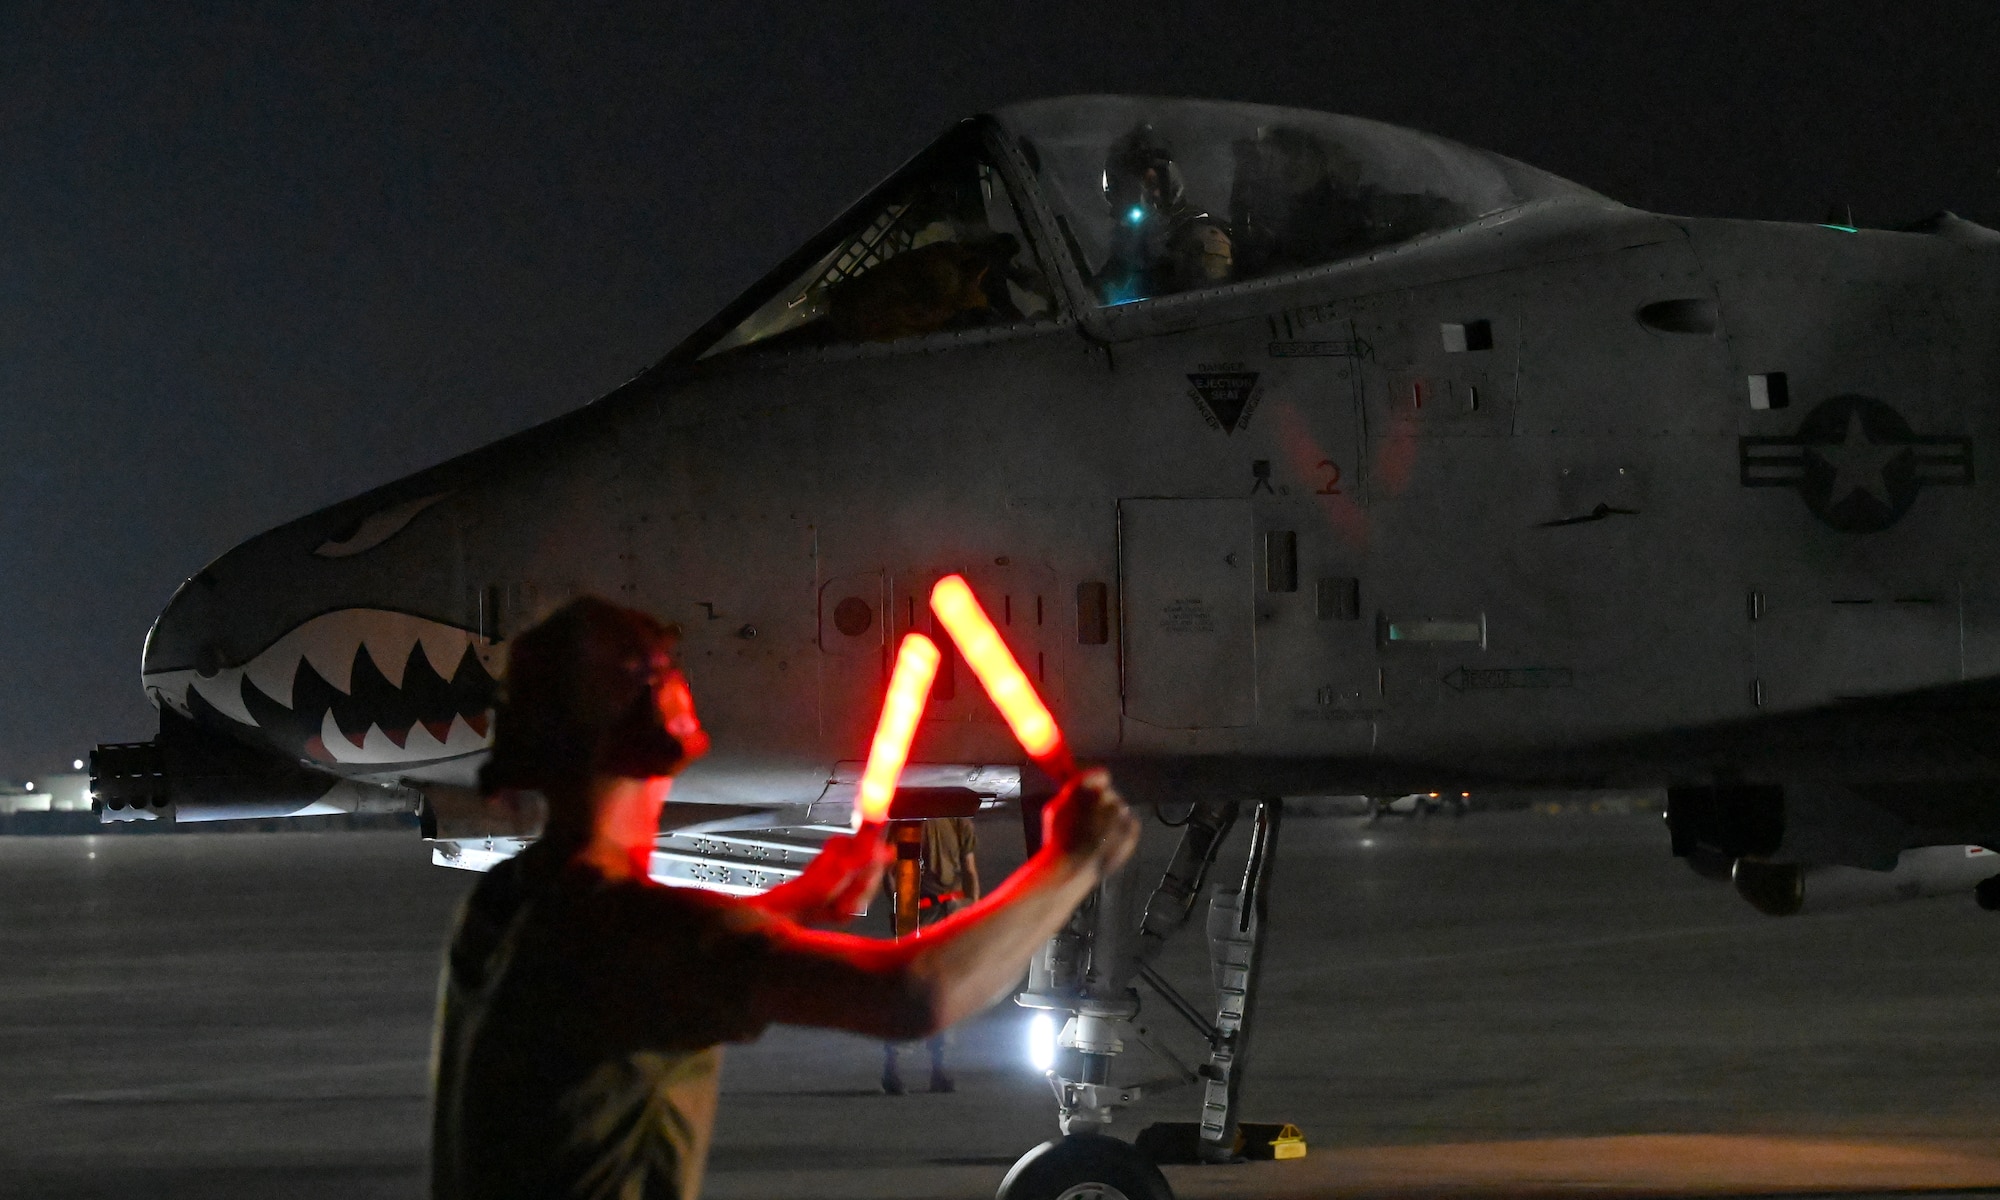 U.S. Air Force Airman 1st Class Dylan Prusso, 75th Expeditionary Fighter Generation Squadron crew chief, marshalls a 75th Expeditionary Fighter Squadron A-10 Thunderbolt II for a combat sortie in the U.S. Central Command area of responsibility at Al Dhafra Air Base, United Arab Emirates, April 20, 2022. The deployment of A-10s in the region provides additional capability in the Middle East alongside fighter aircraft. This deployment ensures close air support specialists are able to build upon their skills in environments outside of the United States and ensure combat operations remain sharp across the force. (U.S. Air Force photo by Tech. Sgt. Alex Fox Echols III)